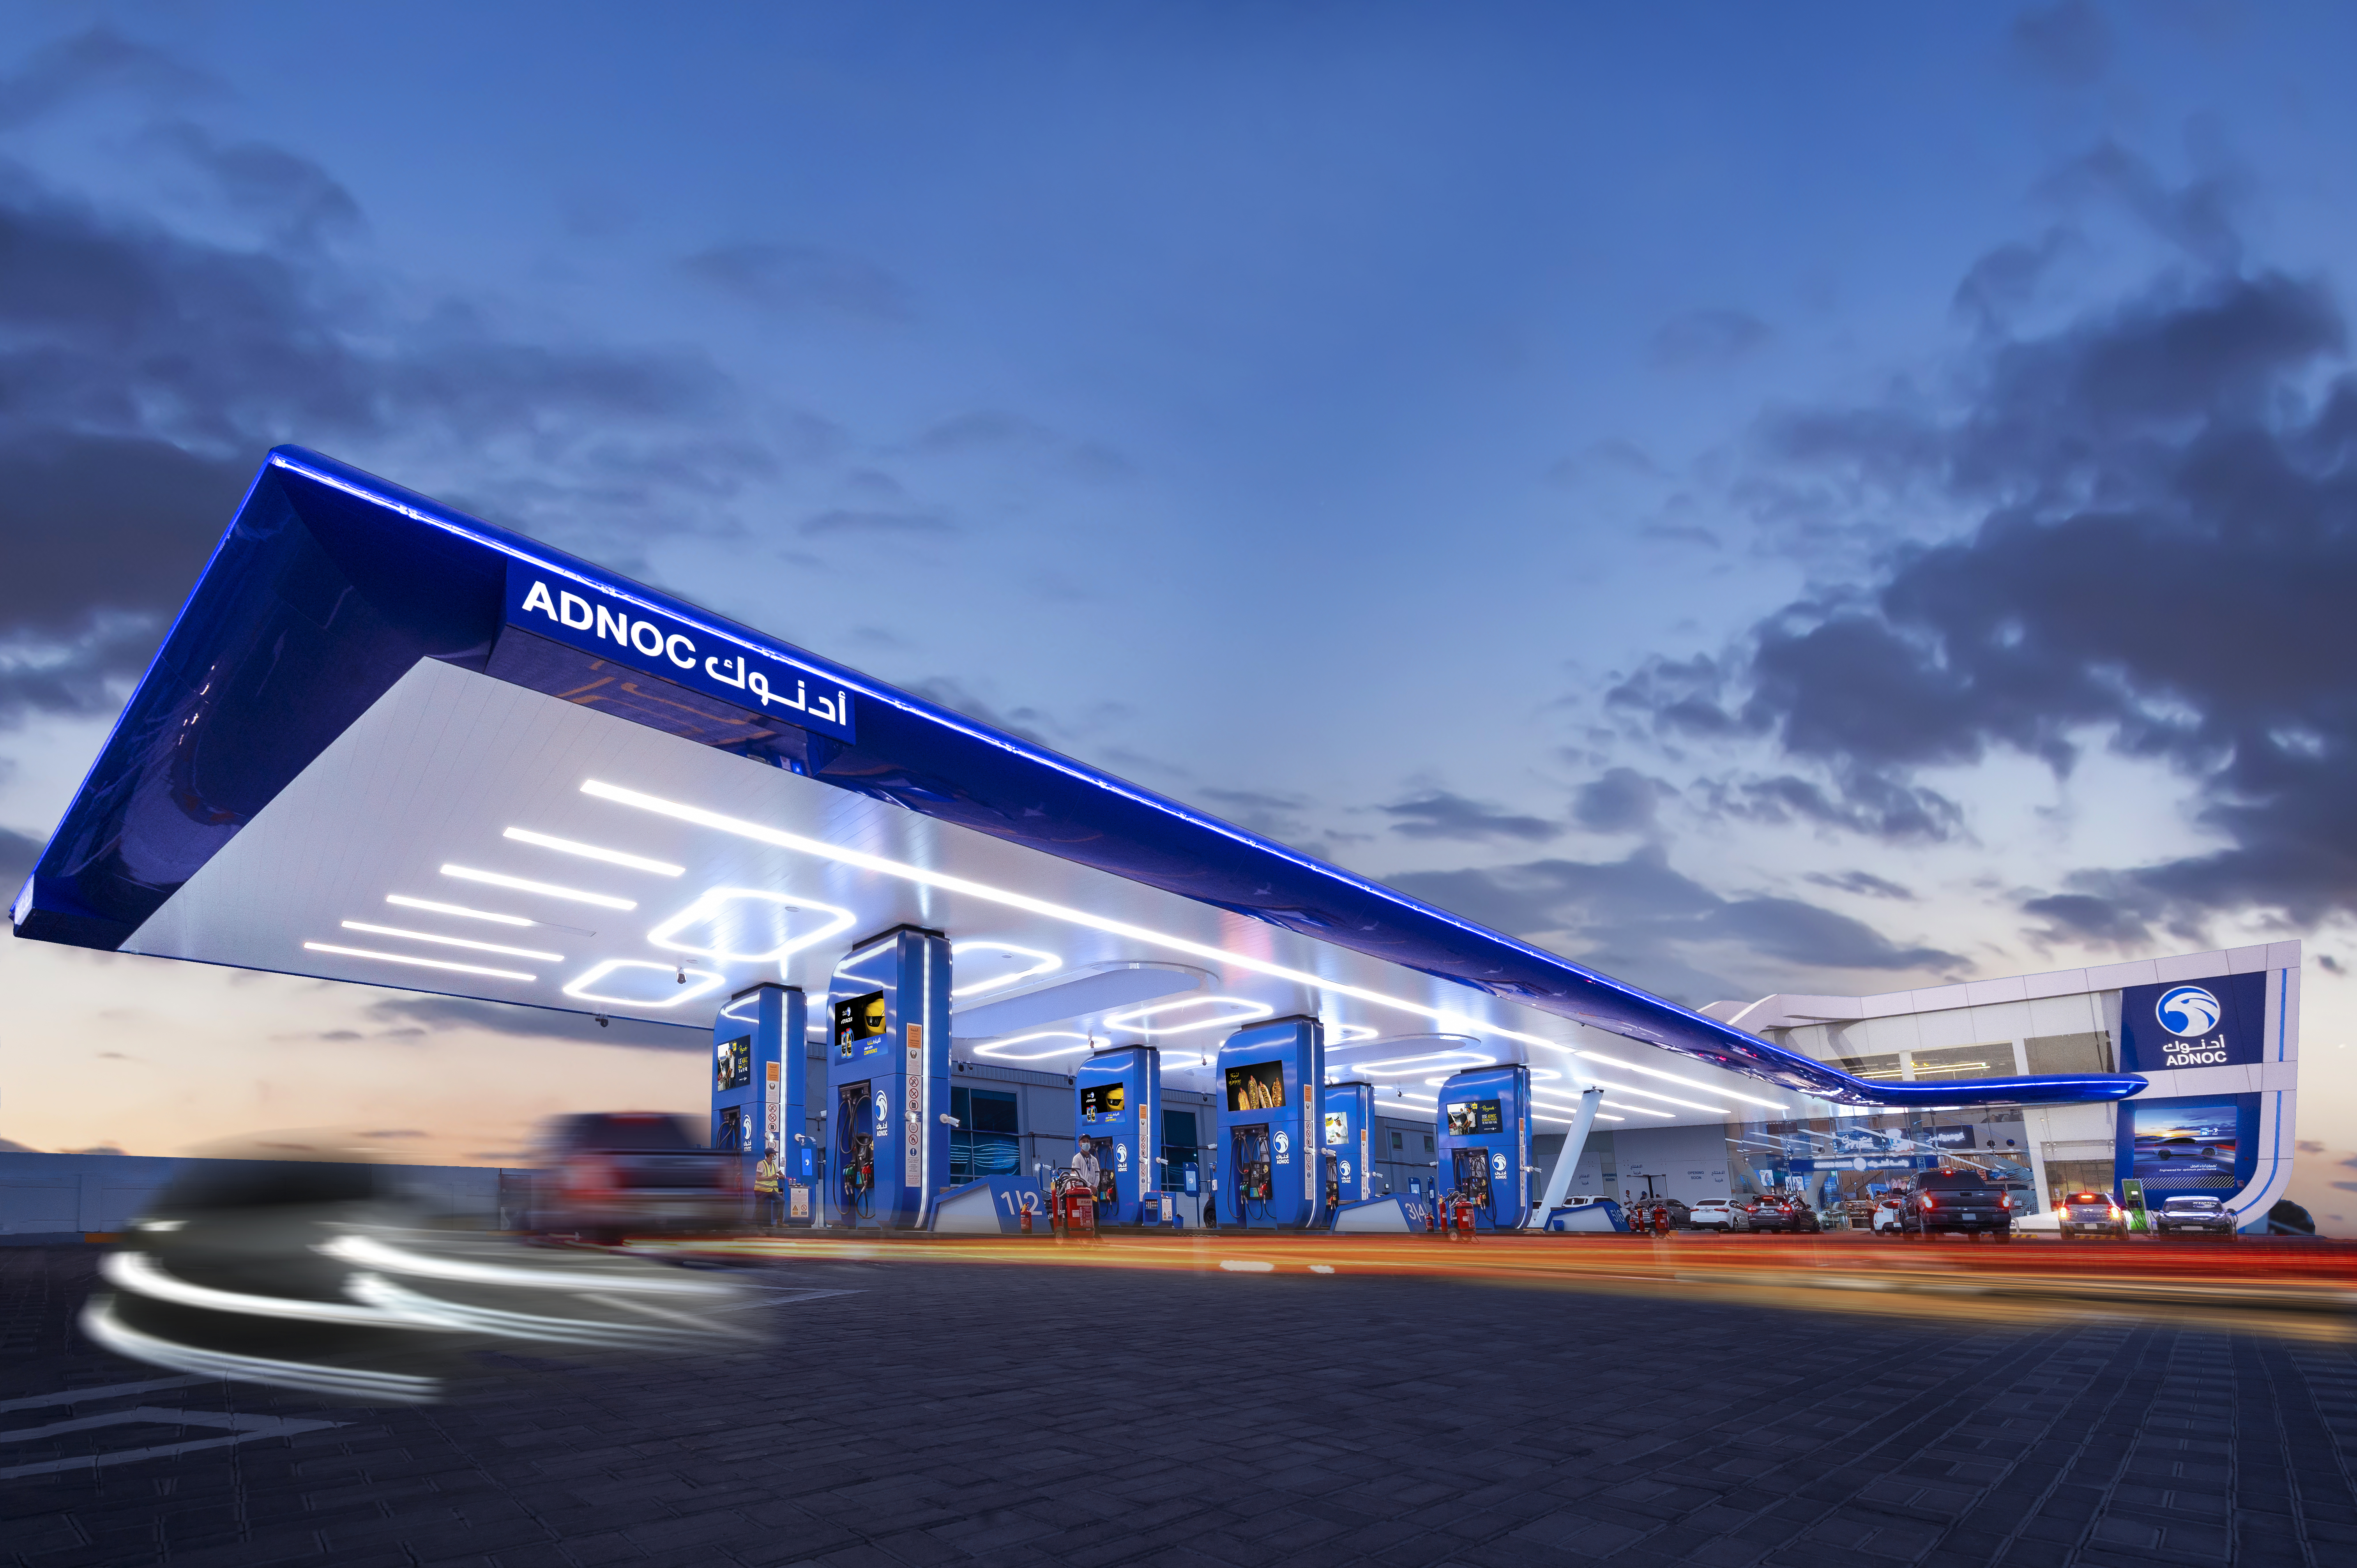 ADNOC distribution board approves AED 1.285bln interim cash dividend for first six months of 2022 (10.285 fils per share)